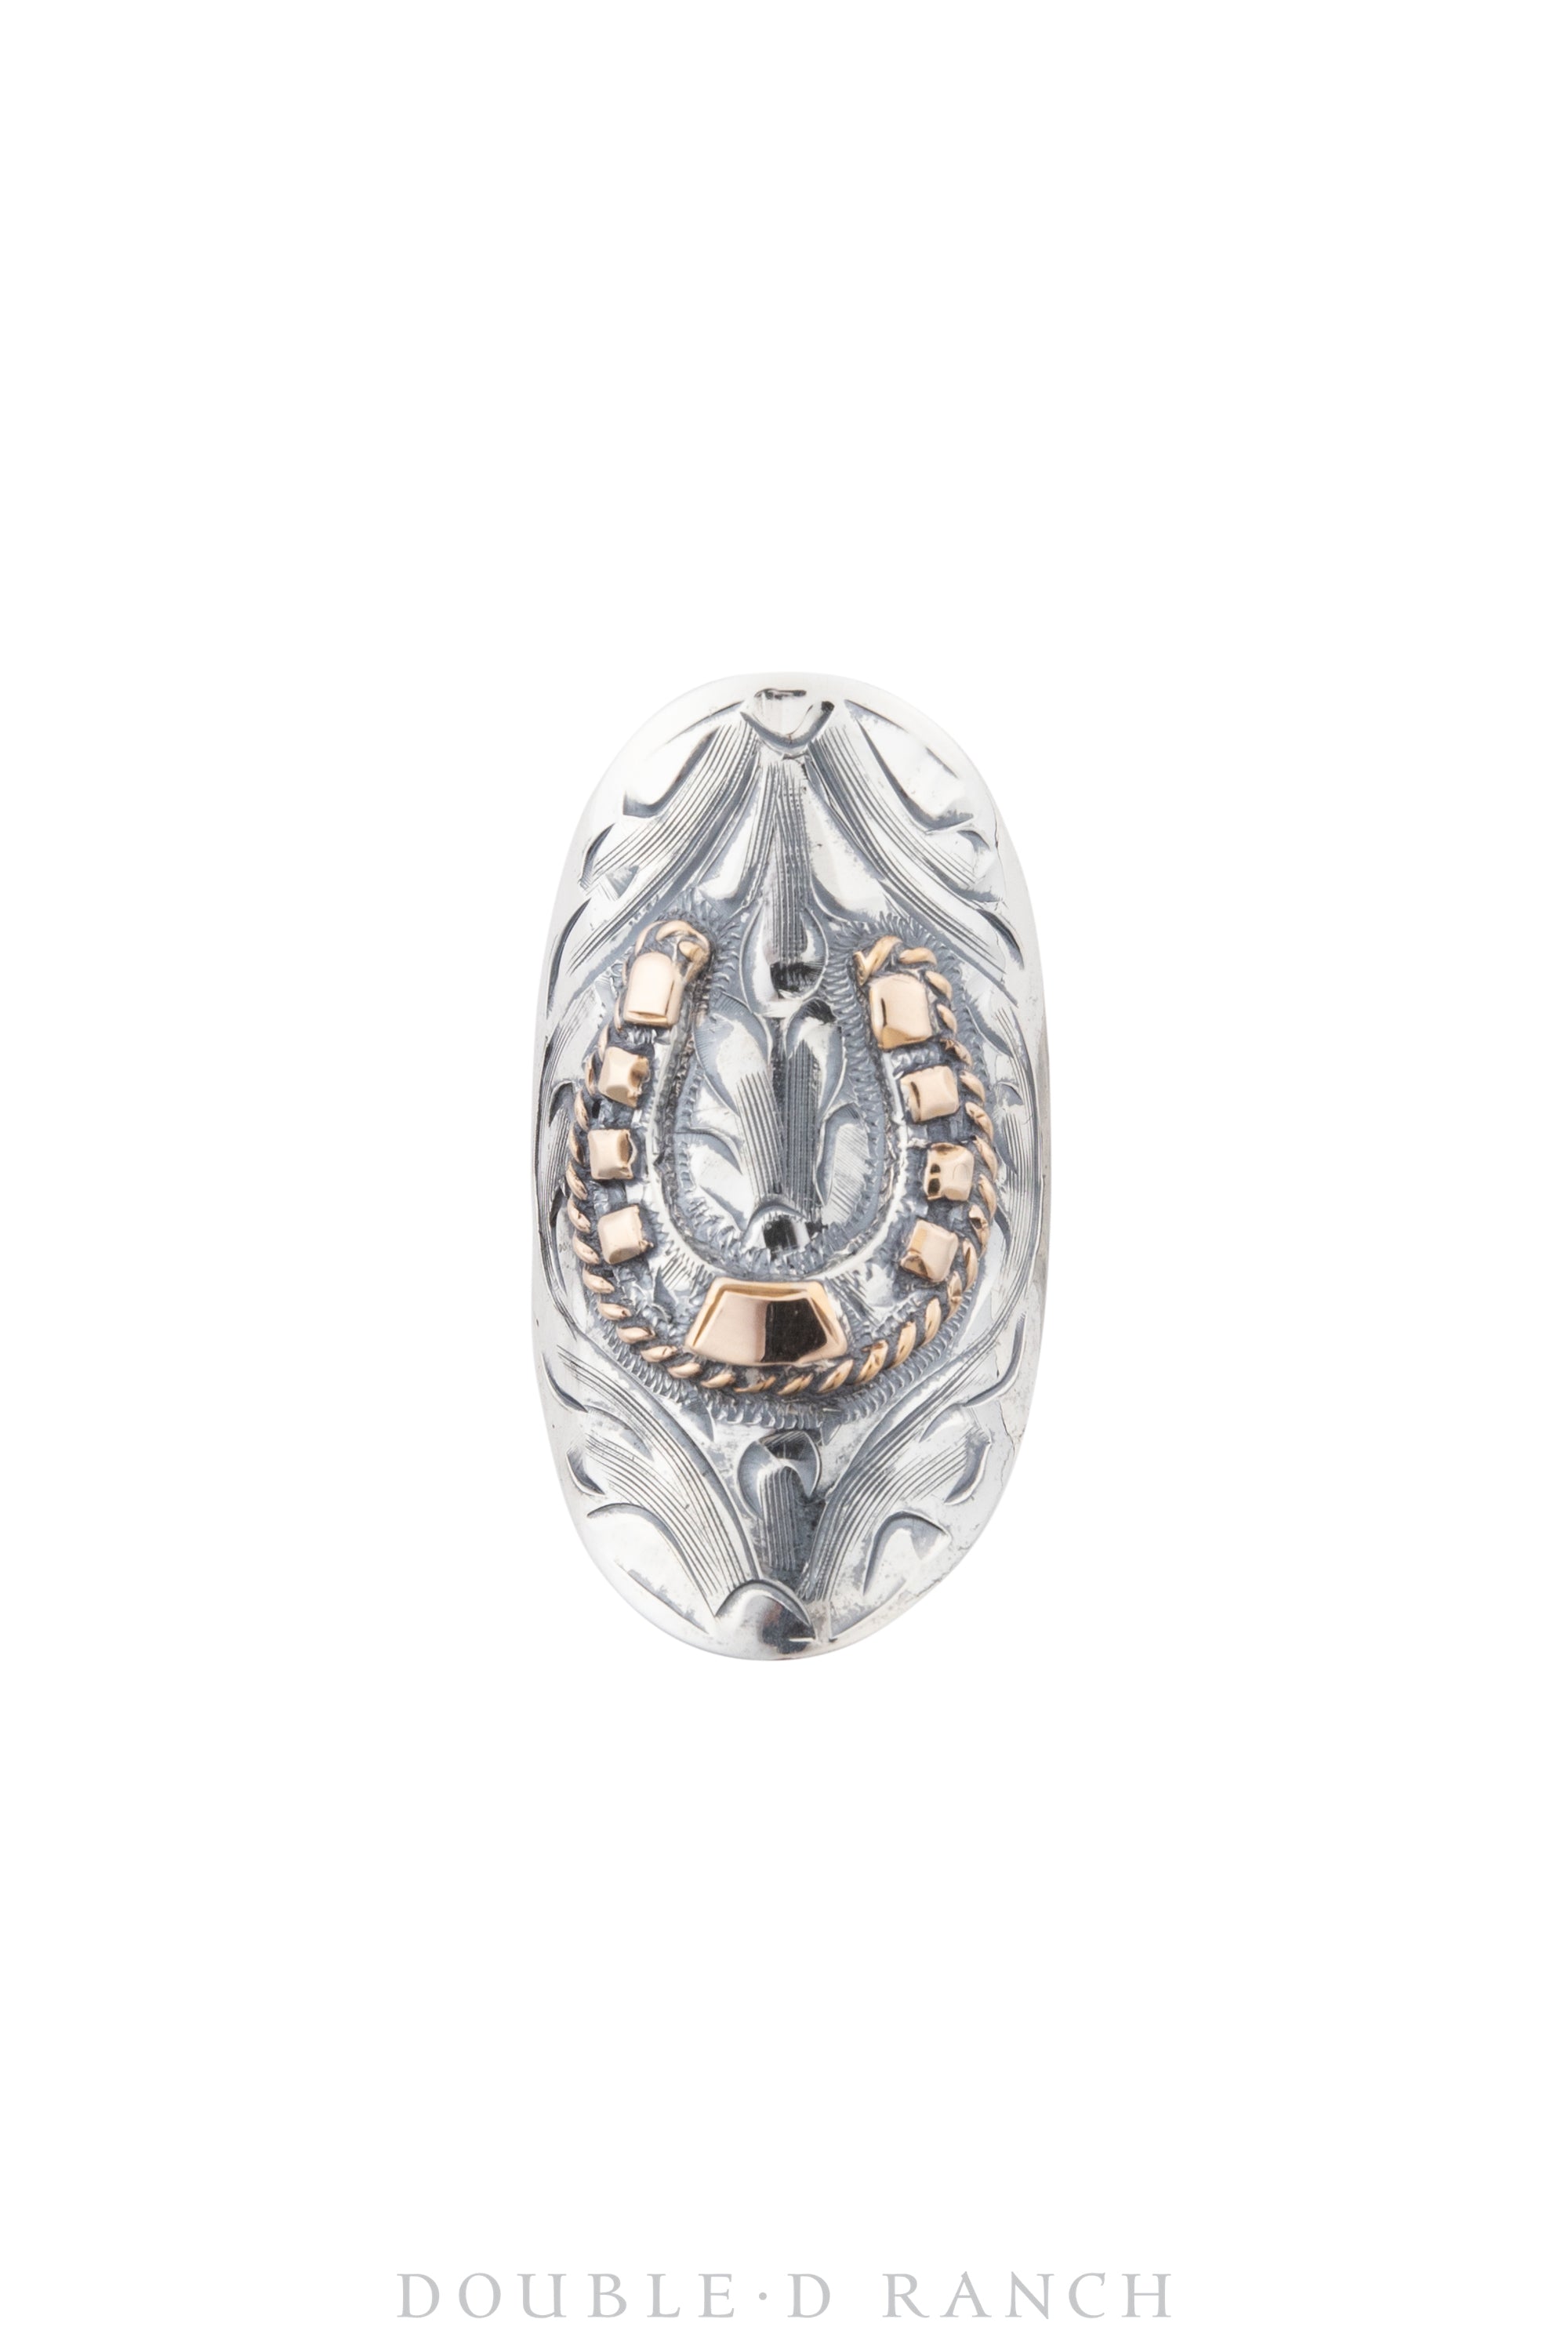 Ring, Western Engraved, Horseshoe Shield, Contemporary, 1265